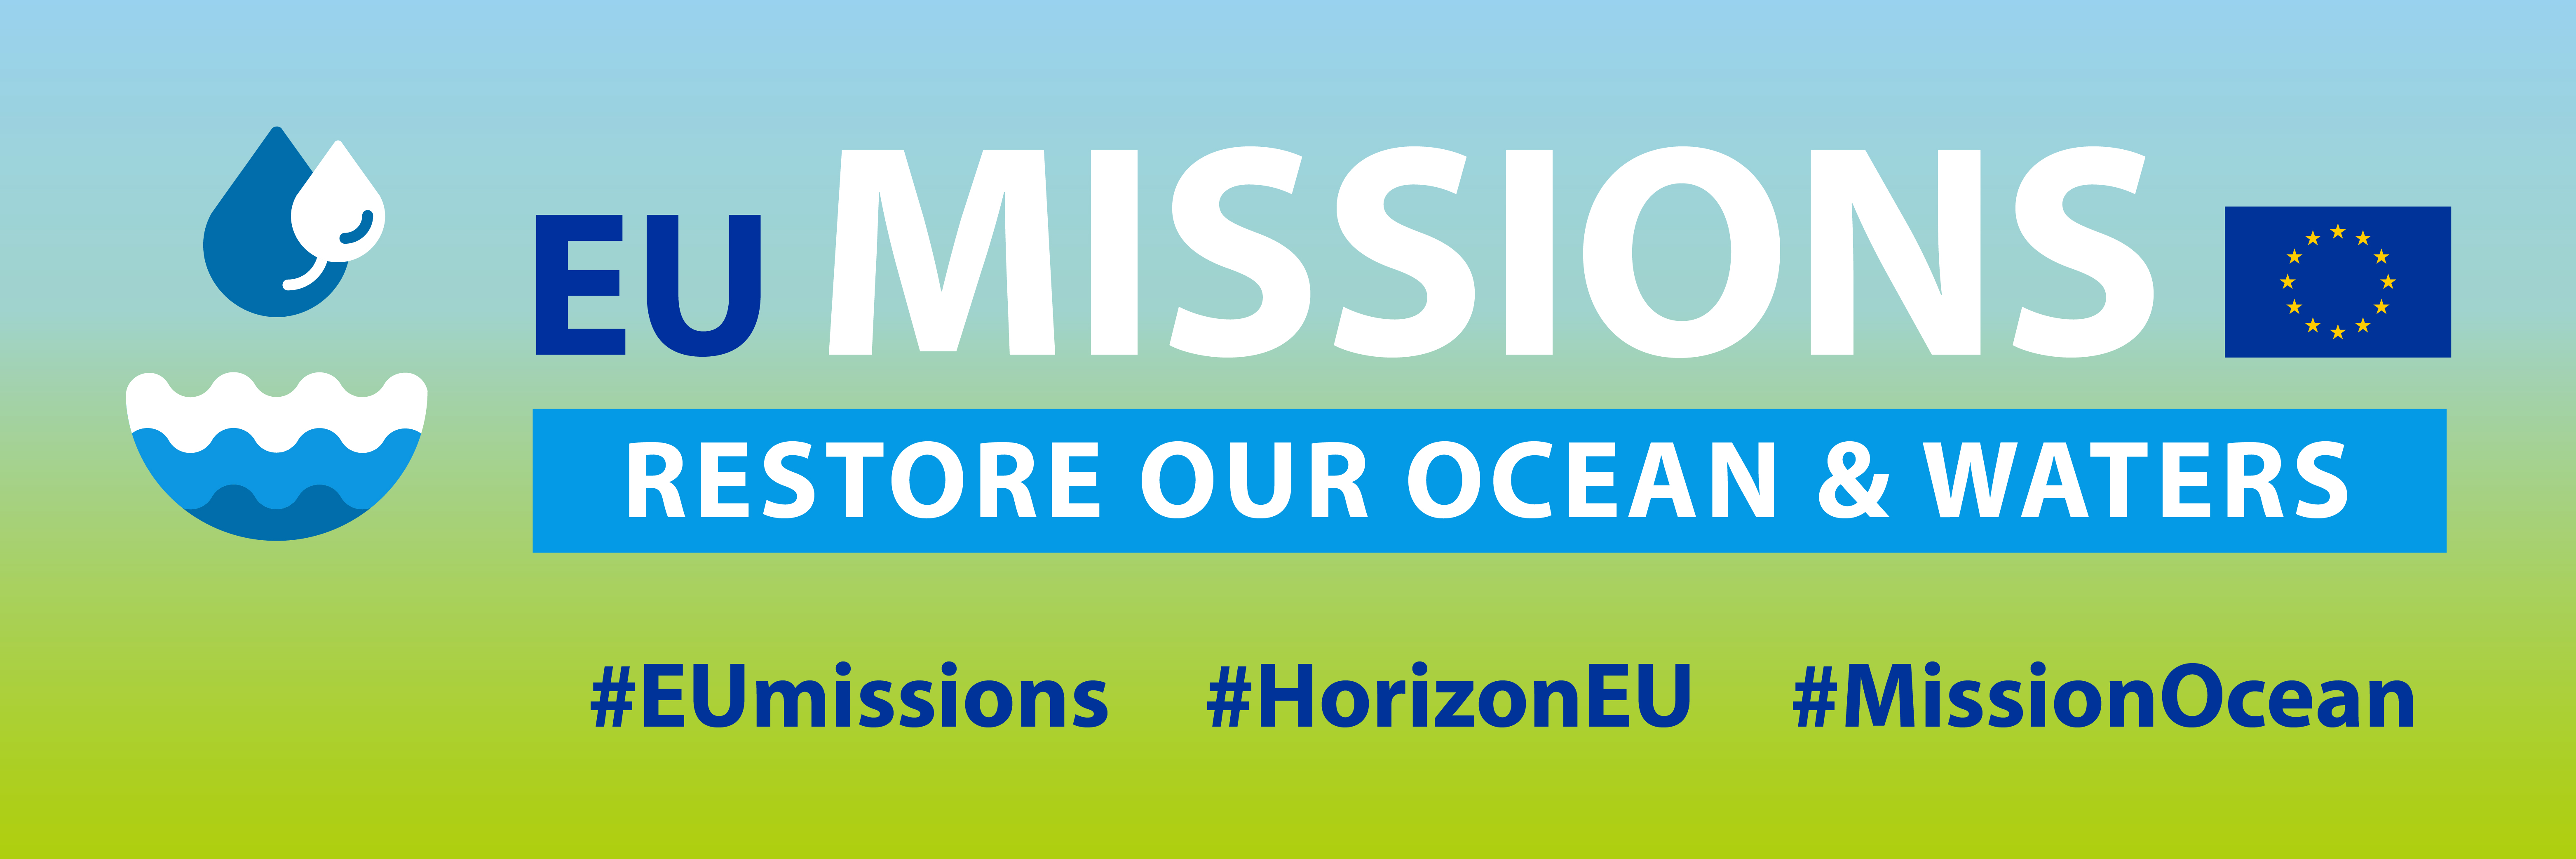 EU Missions - Restore our Ocean & Waters